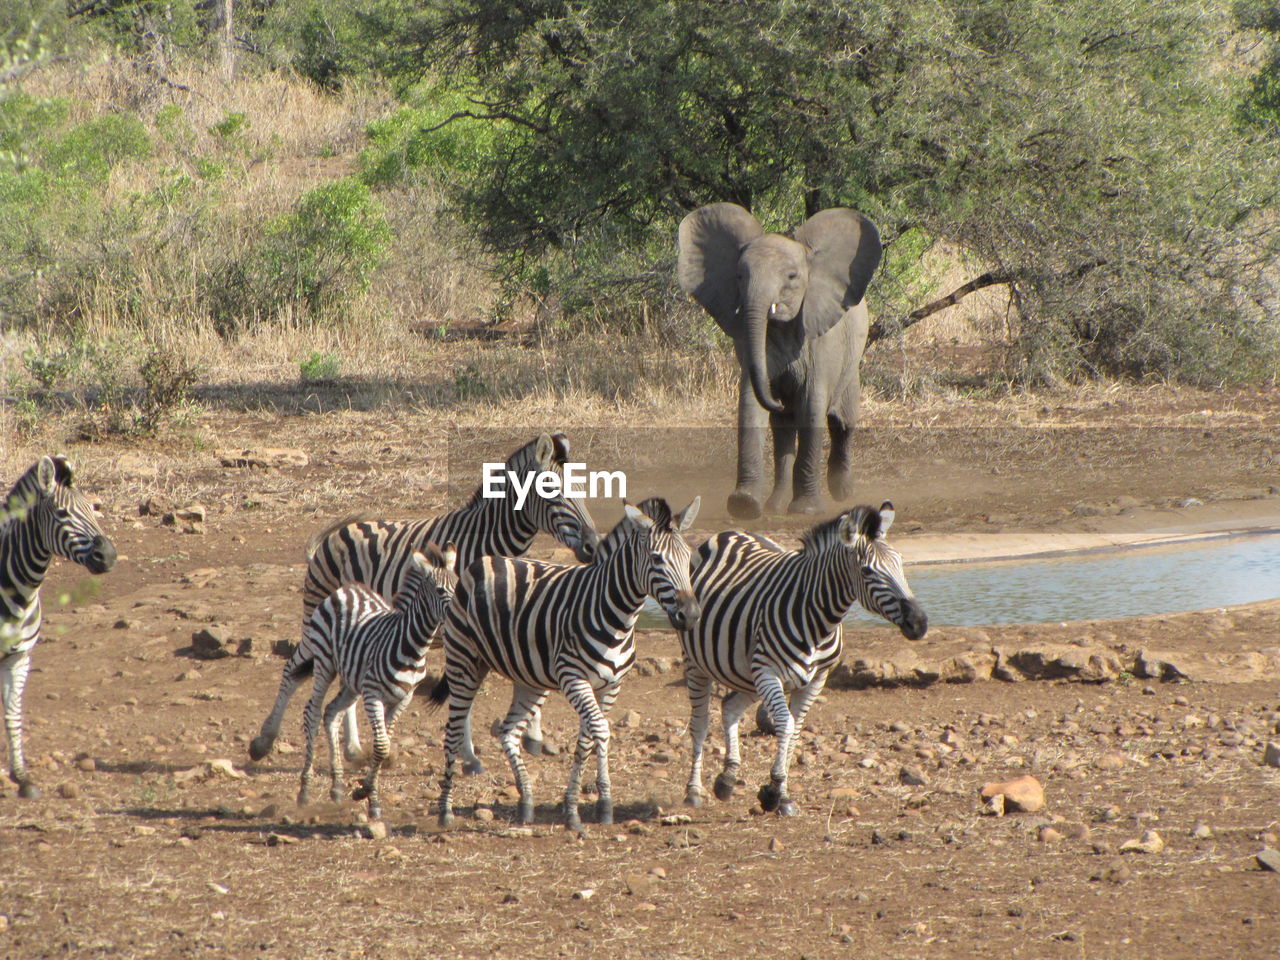 Young elephant chasing zebras